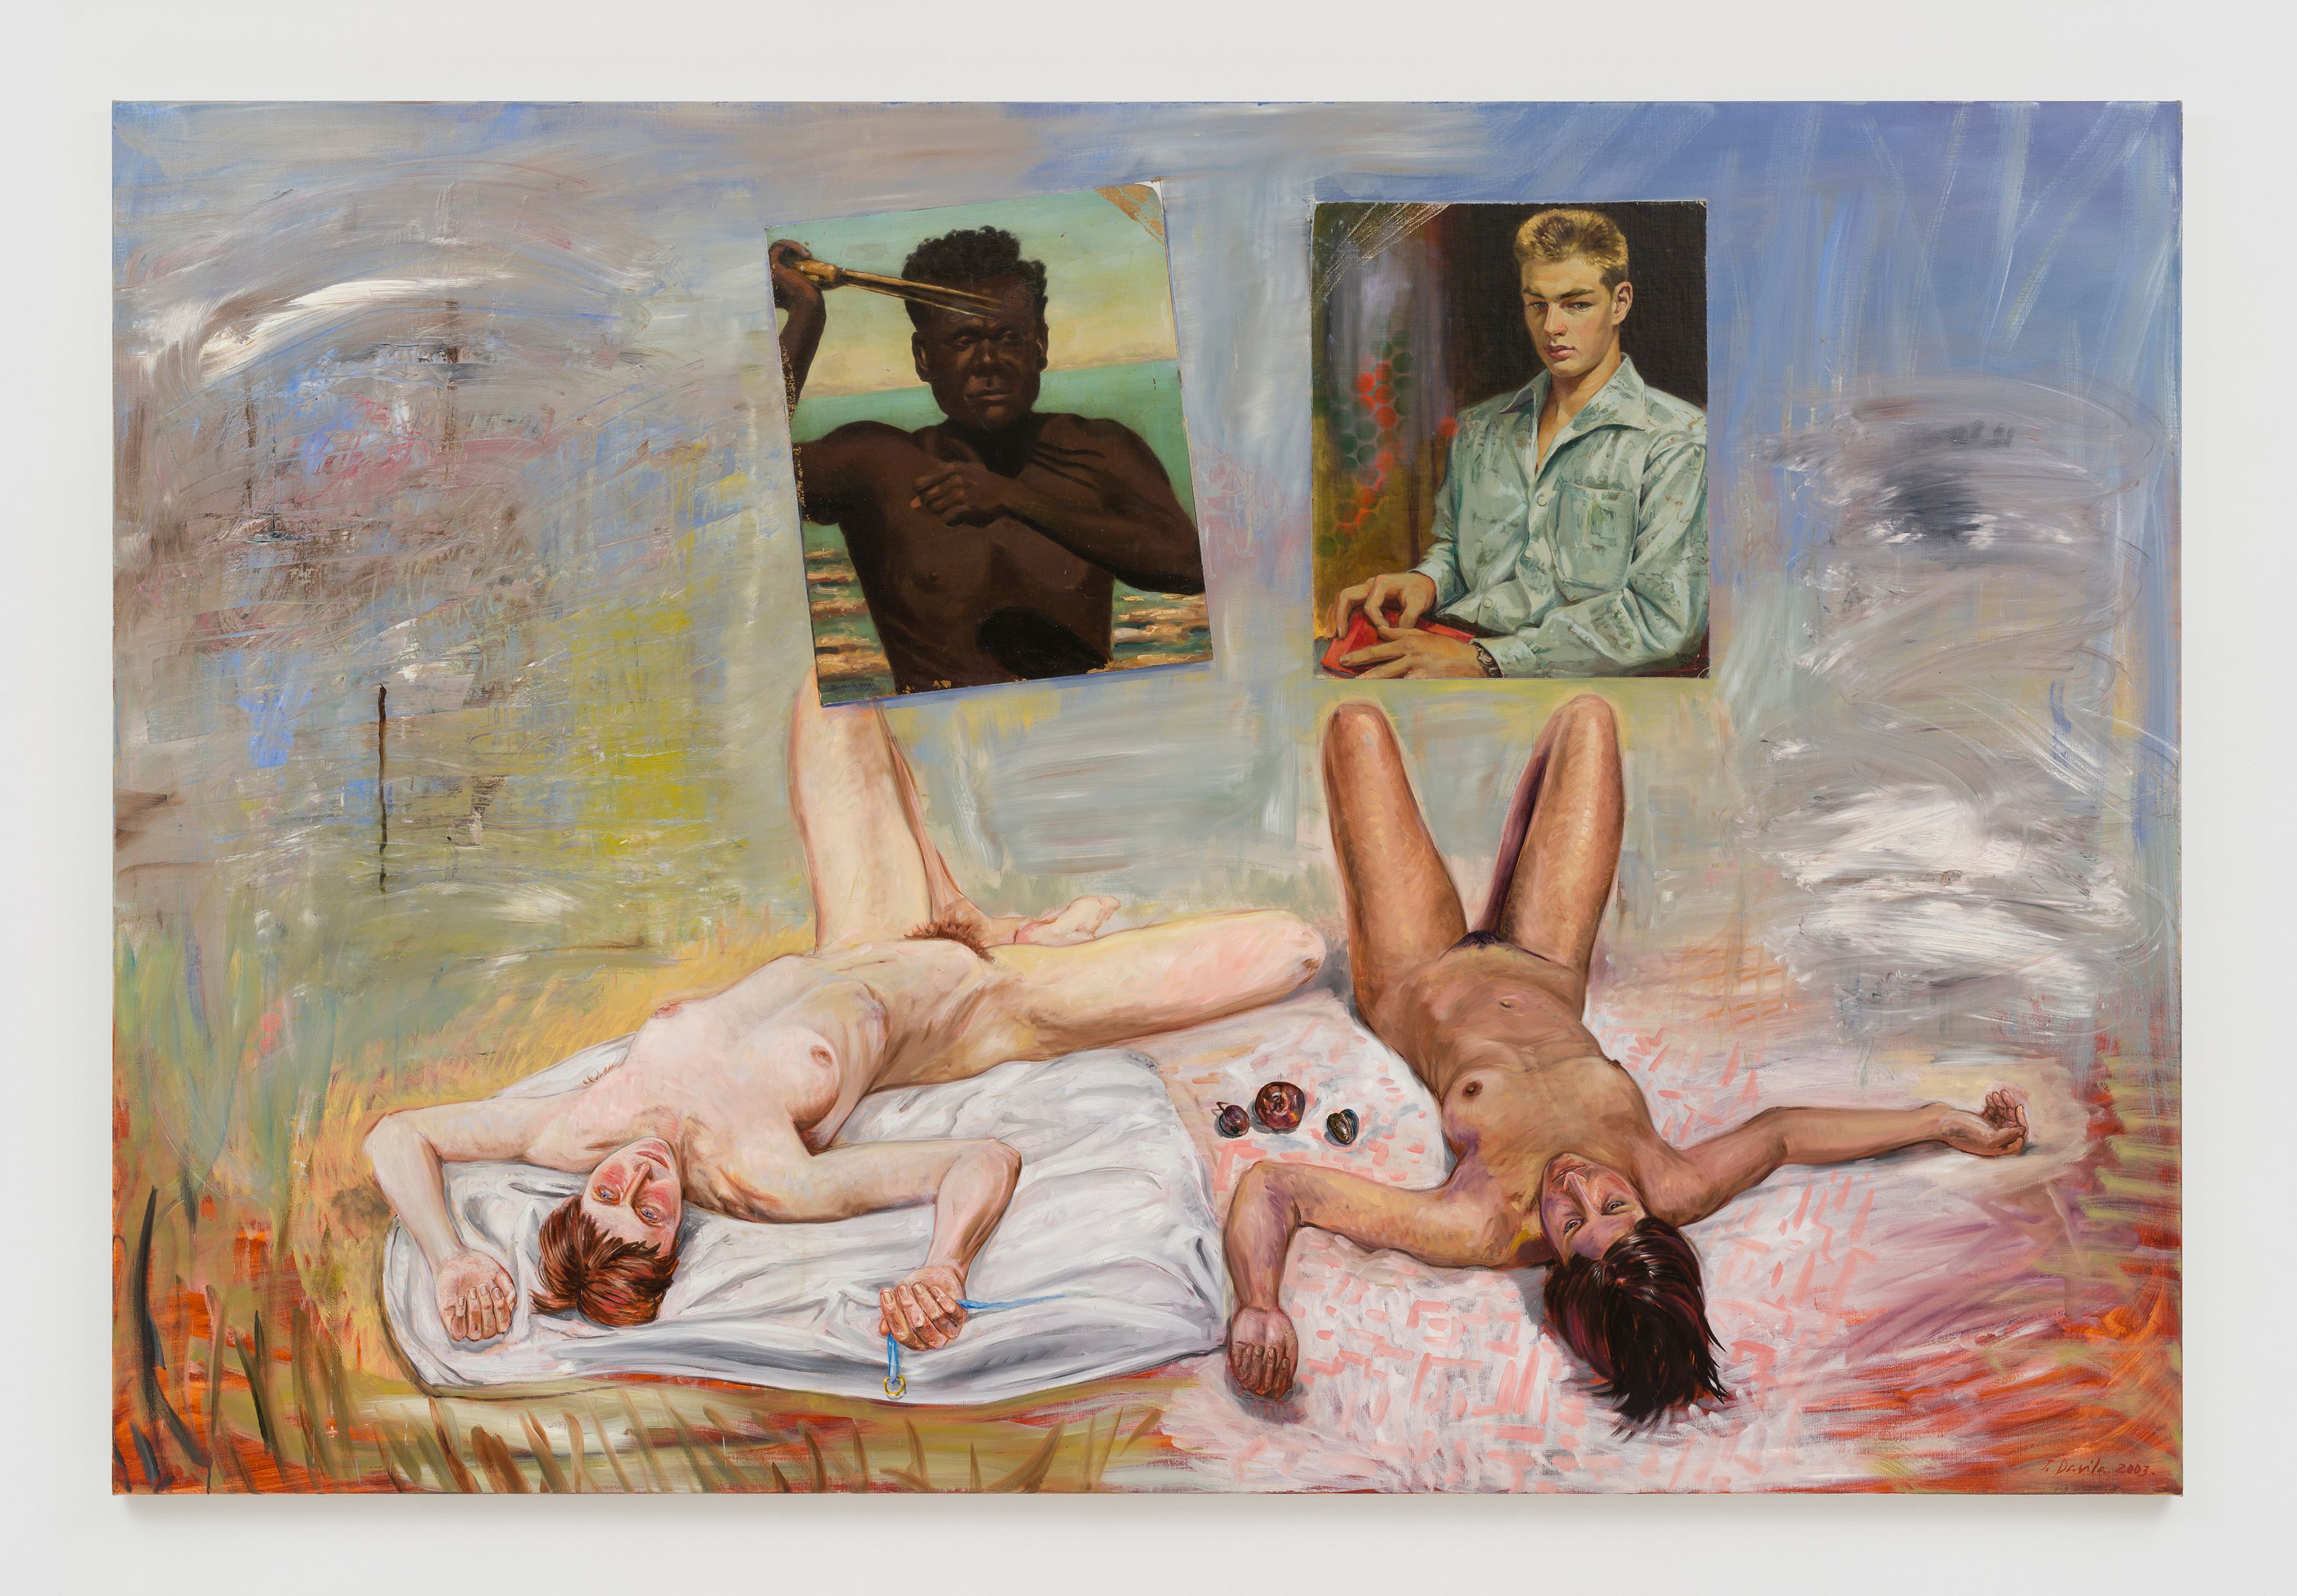 Juan Davila, Two women on the banks of the Yarra, 2003, oil and collage on canvas  68 7/8 x 102 3/8 in. (175 x 260 cm)